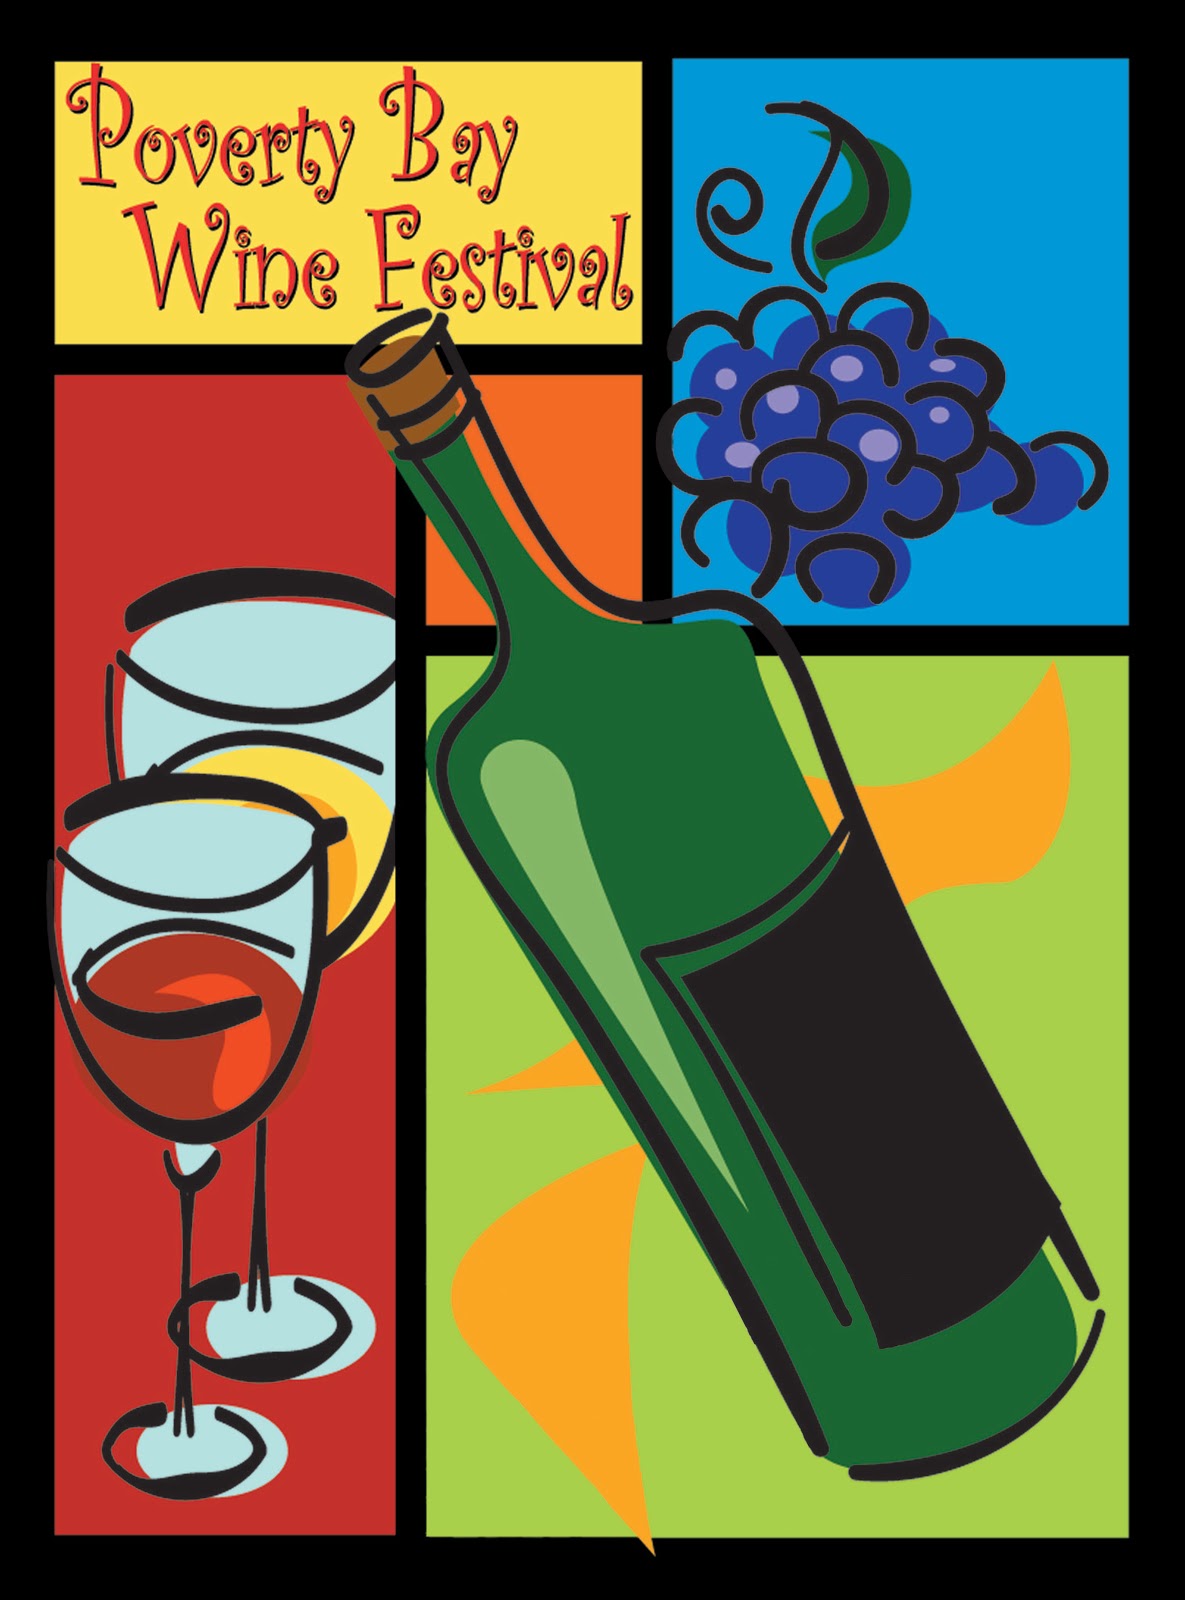 Des Moines Rotary Blog Win Two Tickets to The Poverty Bay Wine Festival!